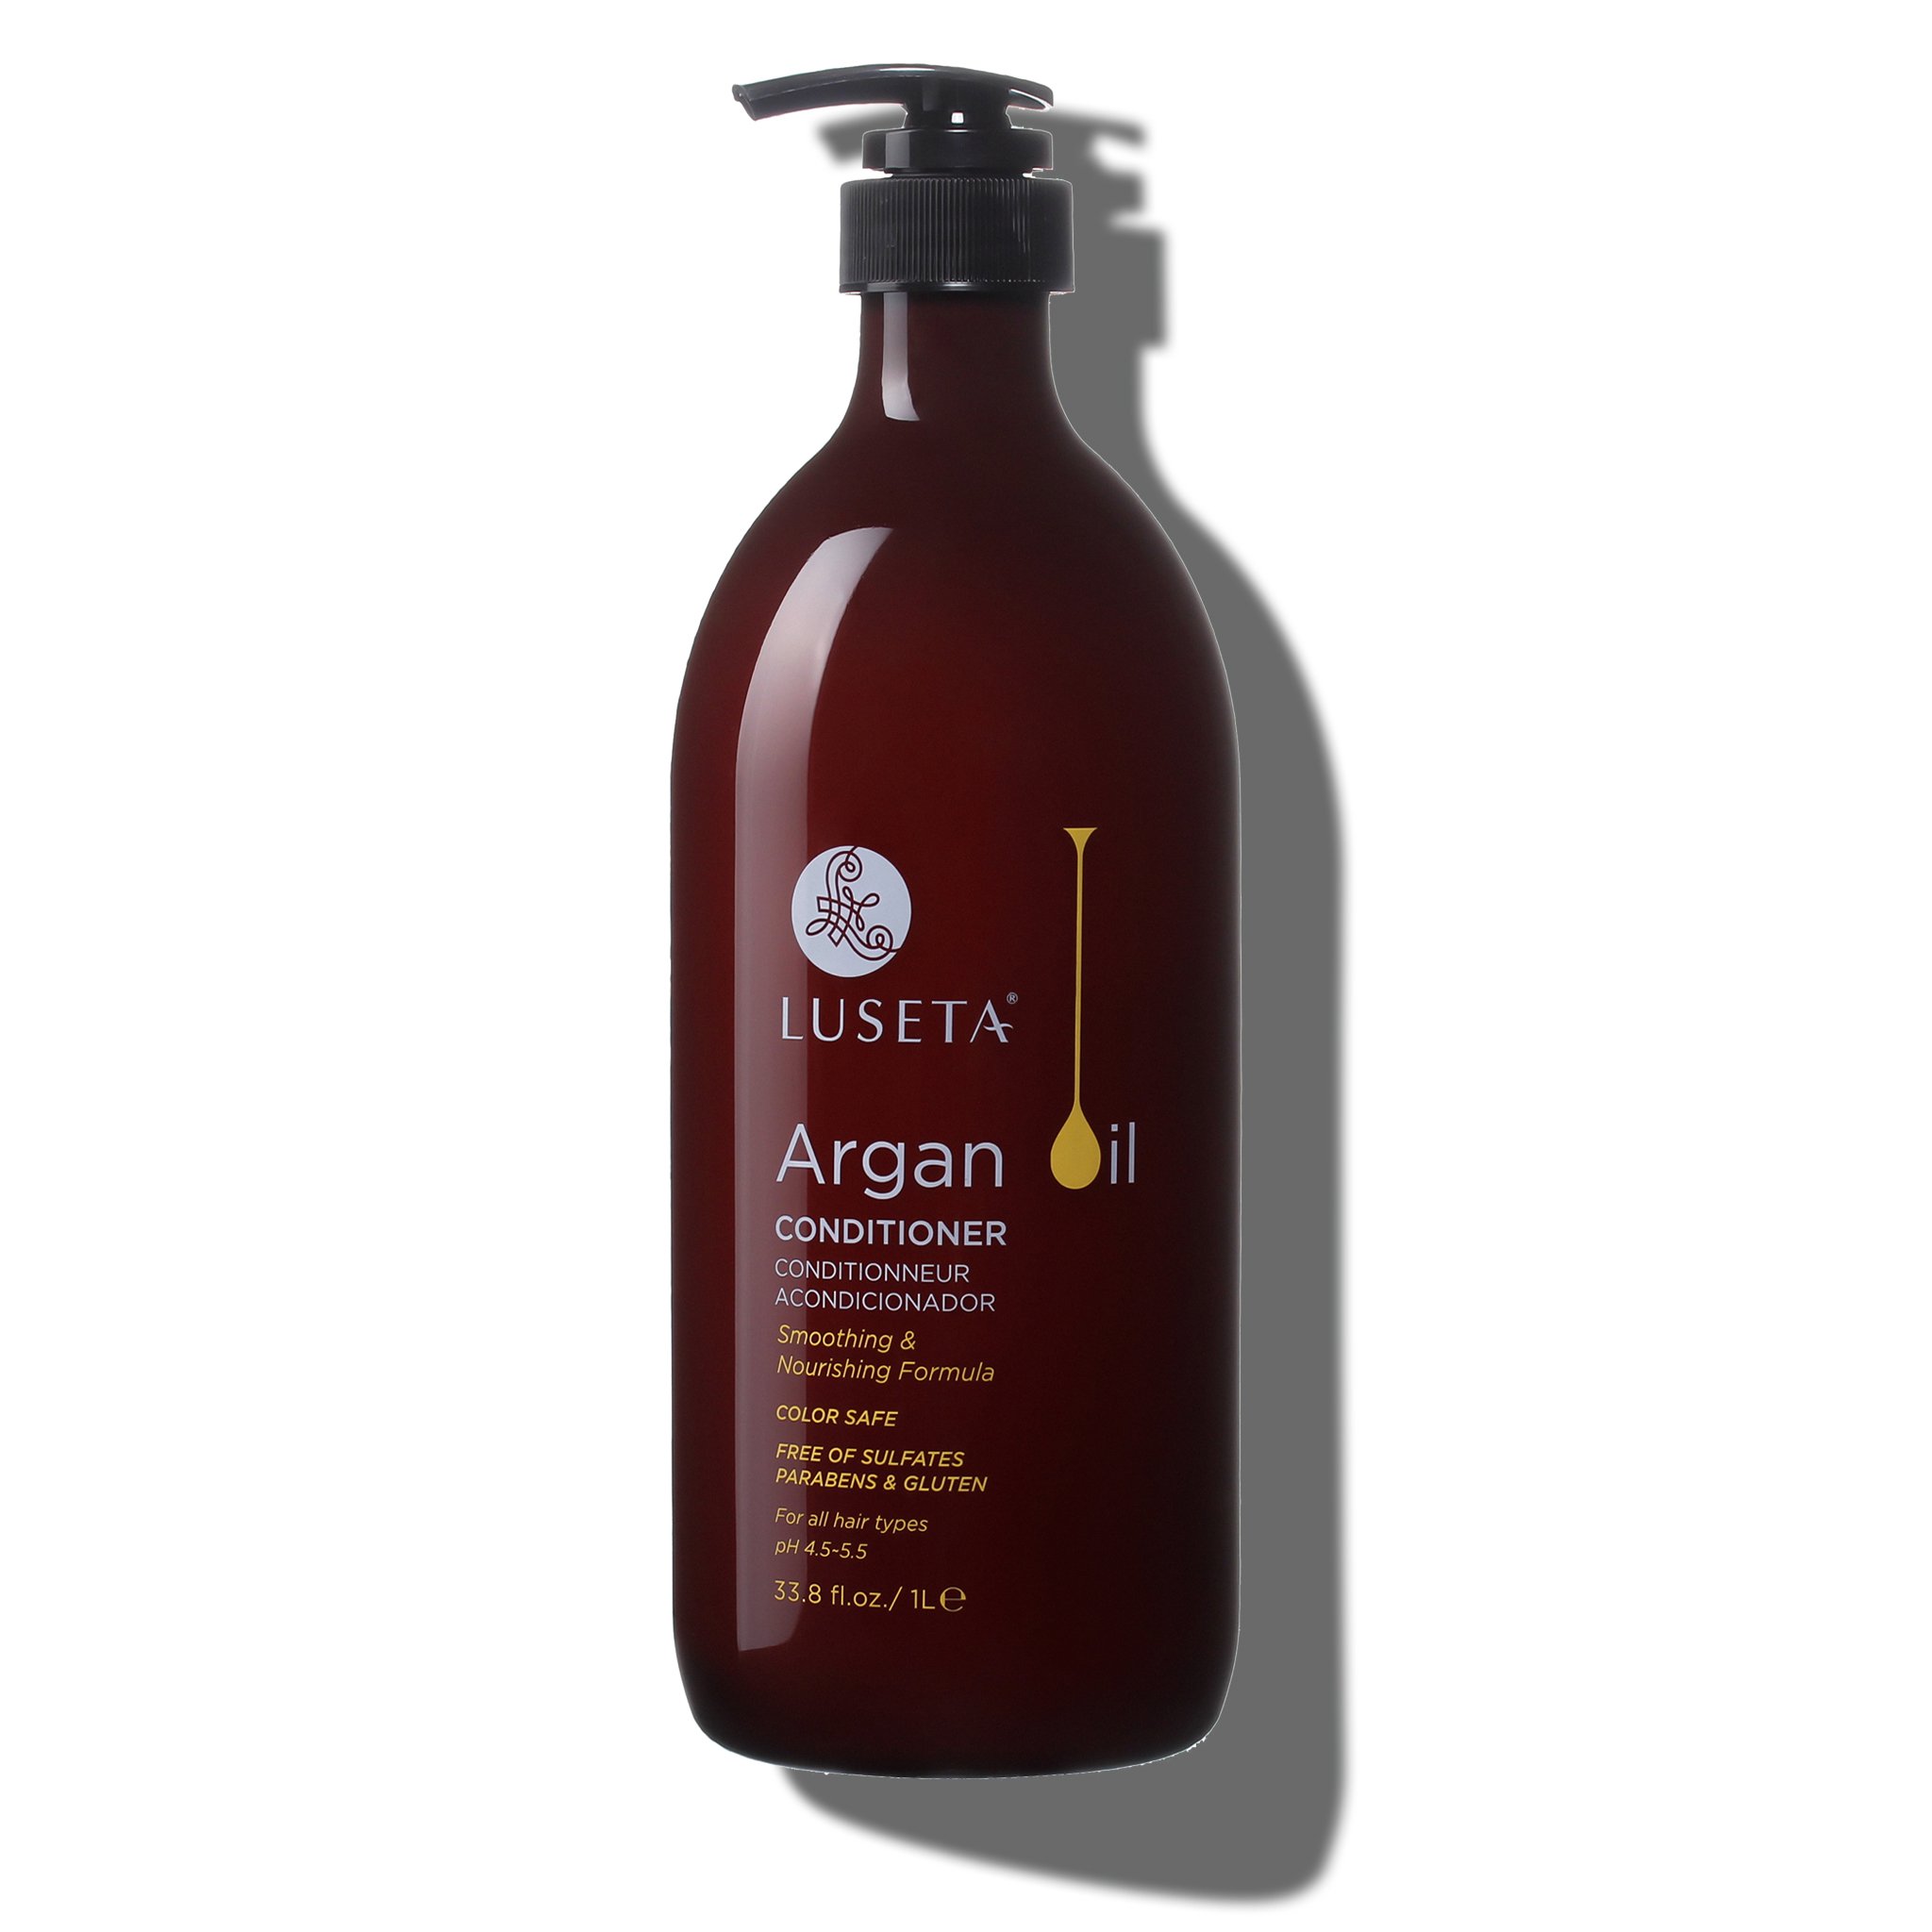 Due to its deep penetrating power, Luseta Argan Oil Conditioner gives the h...